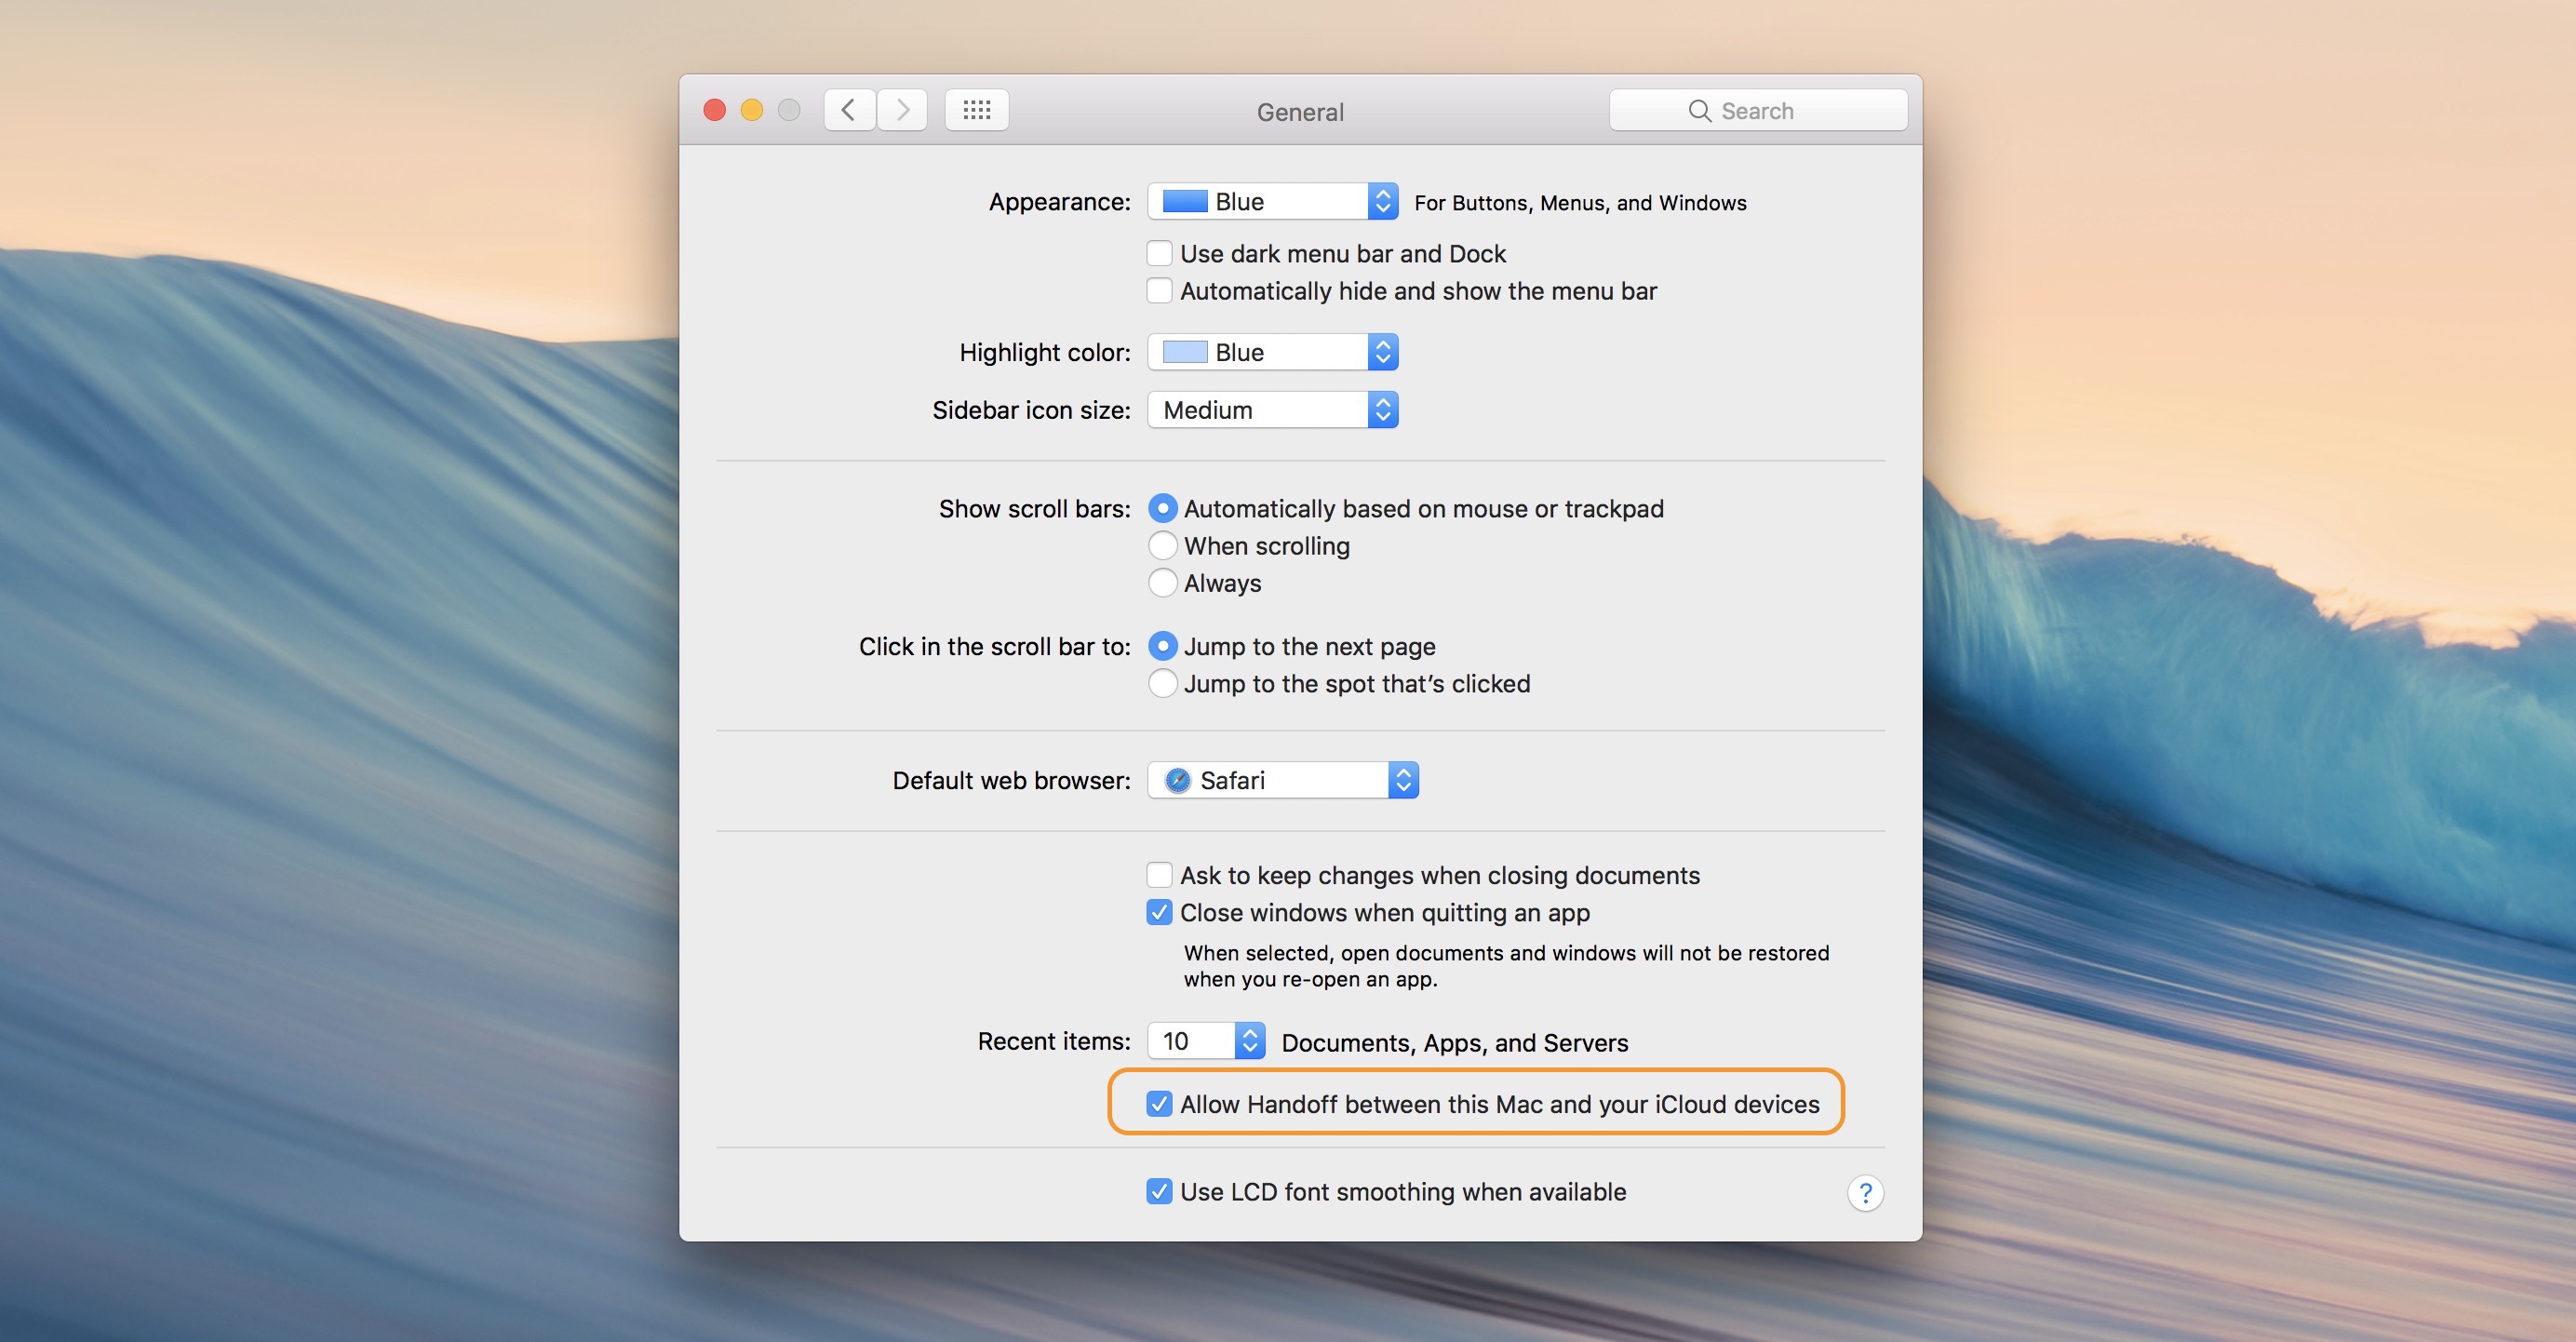 Image showing Handoff setting in macOS System Preferences under General